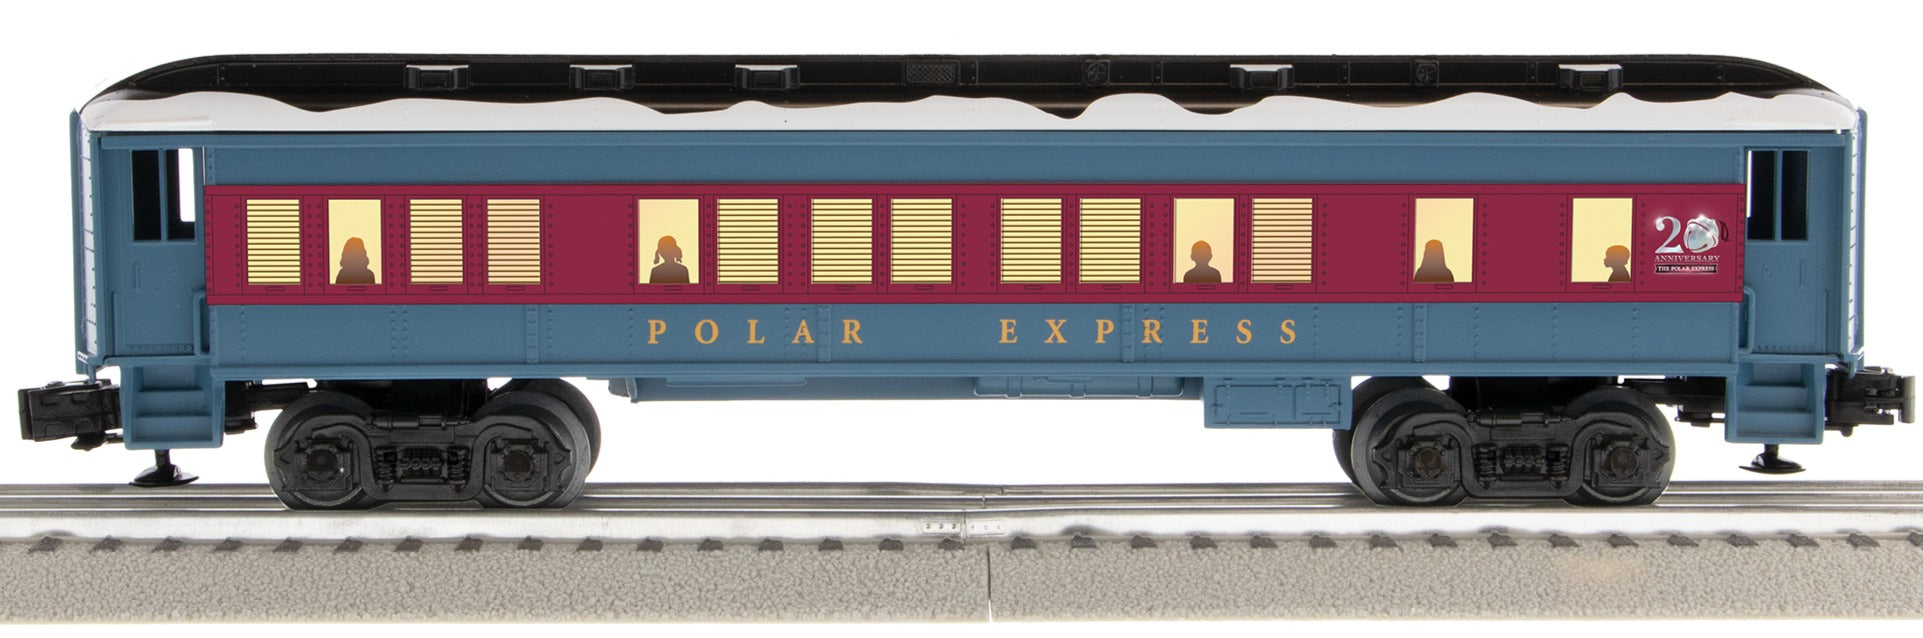 Lionel 2427720 - 20th Anniversary Coach Car "The Polar Express" (White Roof) Add-On